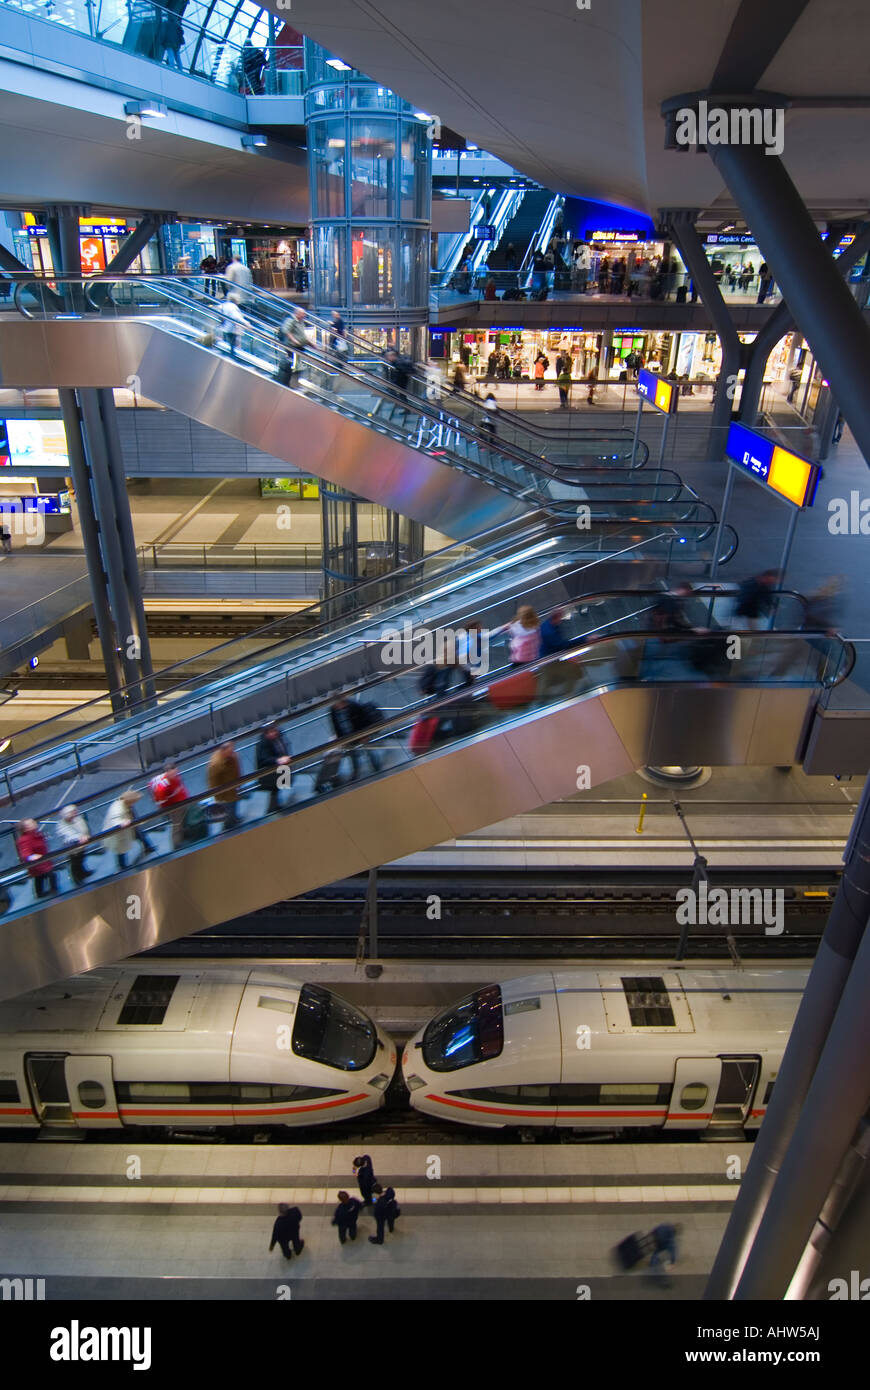 Vertical wide angle of the interior of Berlin Hauptbahnhof 'Berlin Central Station', showing all five levels. Stock Photo